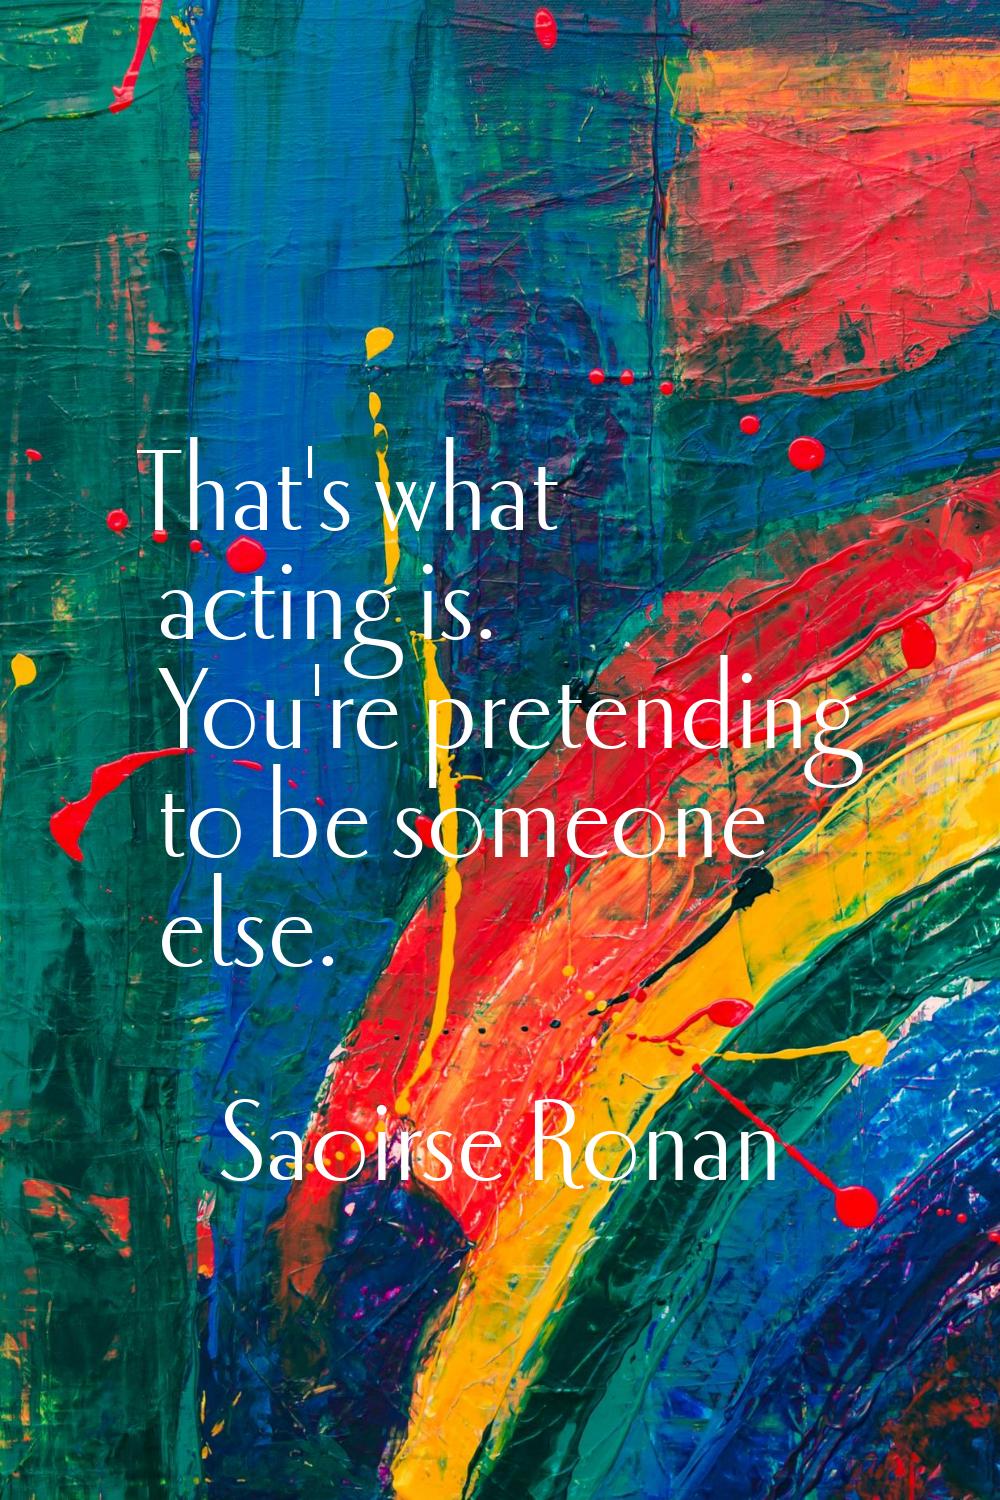 That's what acting is. You're pretending to be someone else.